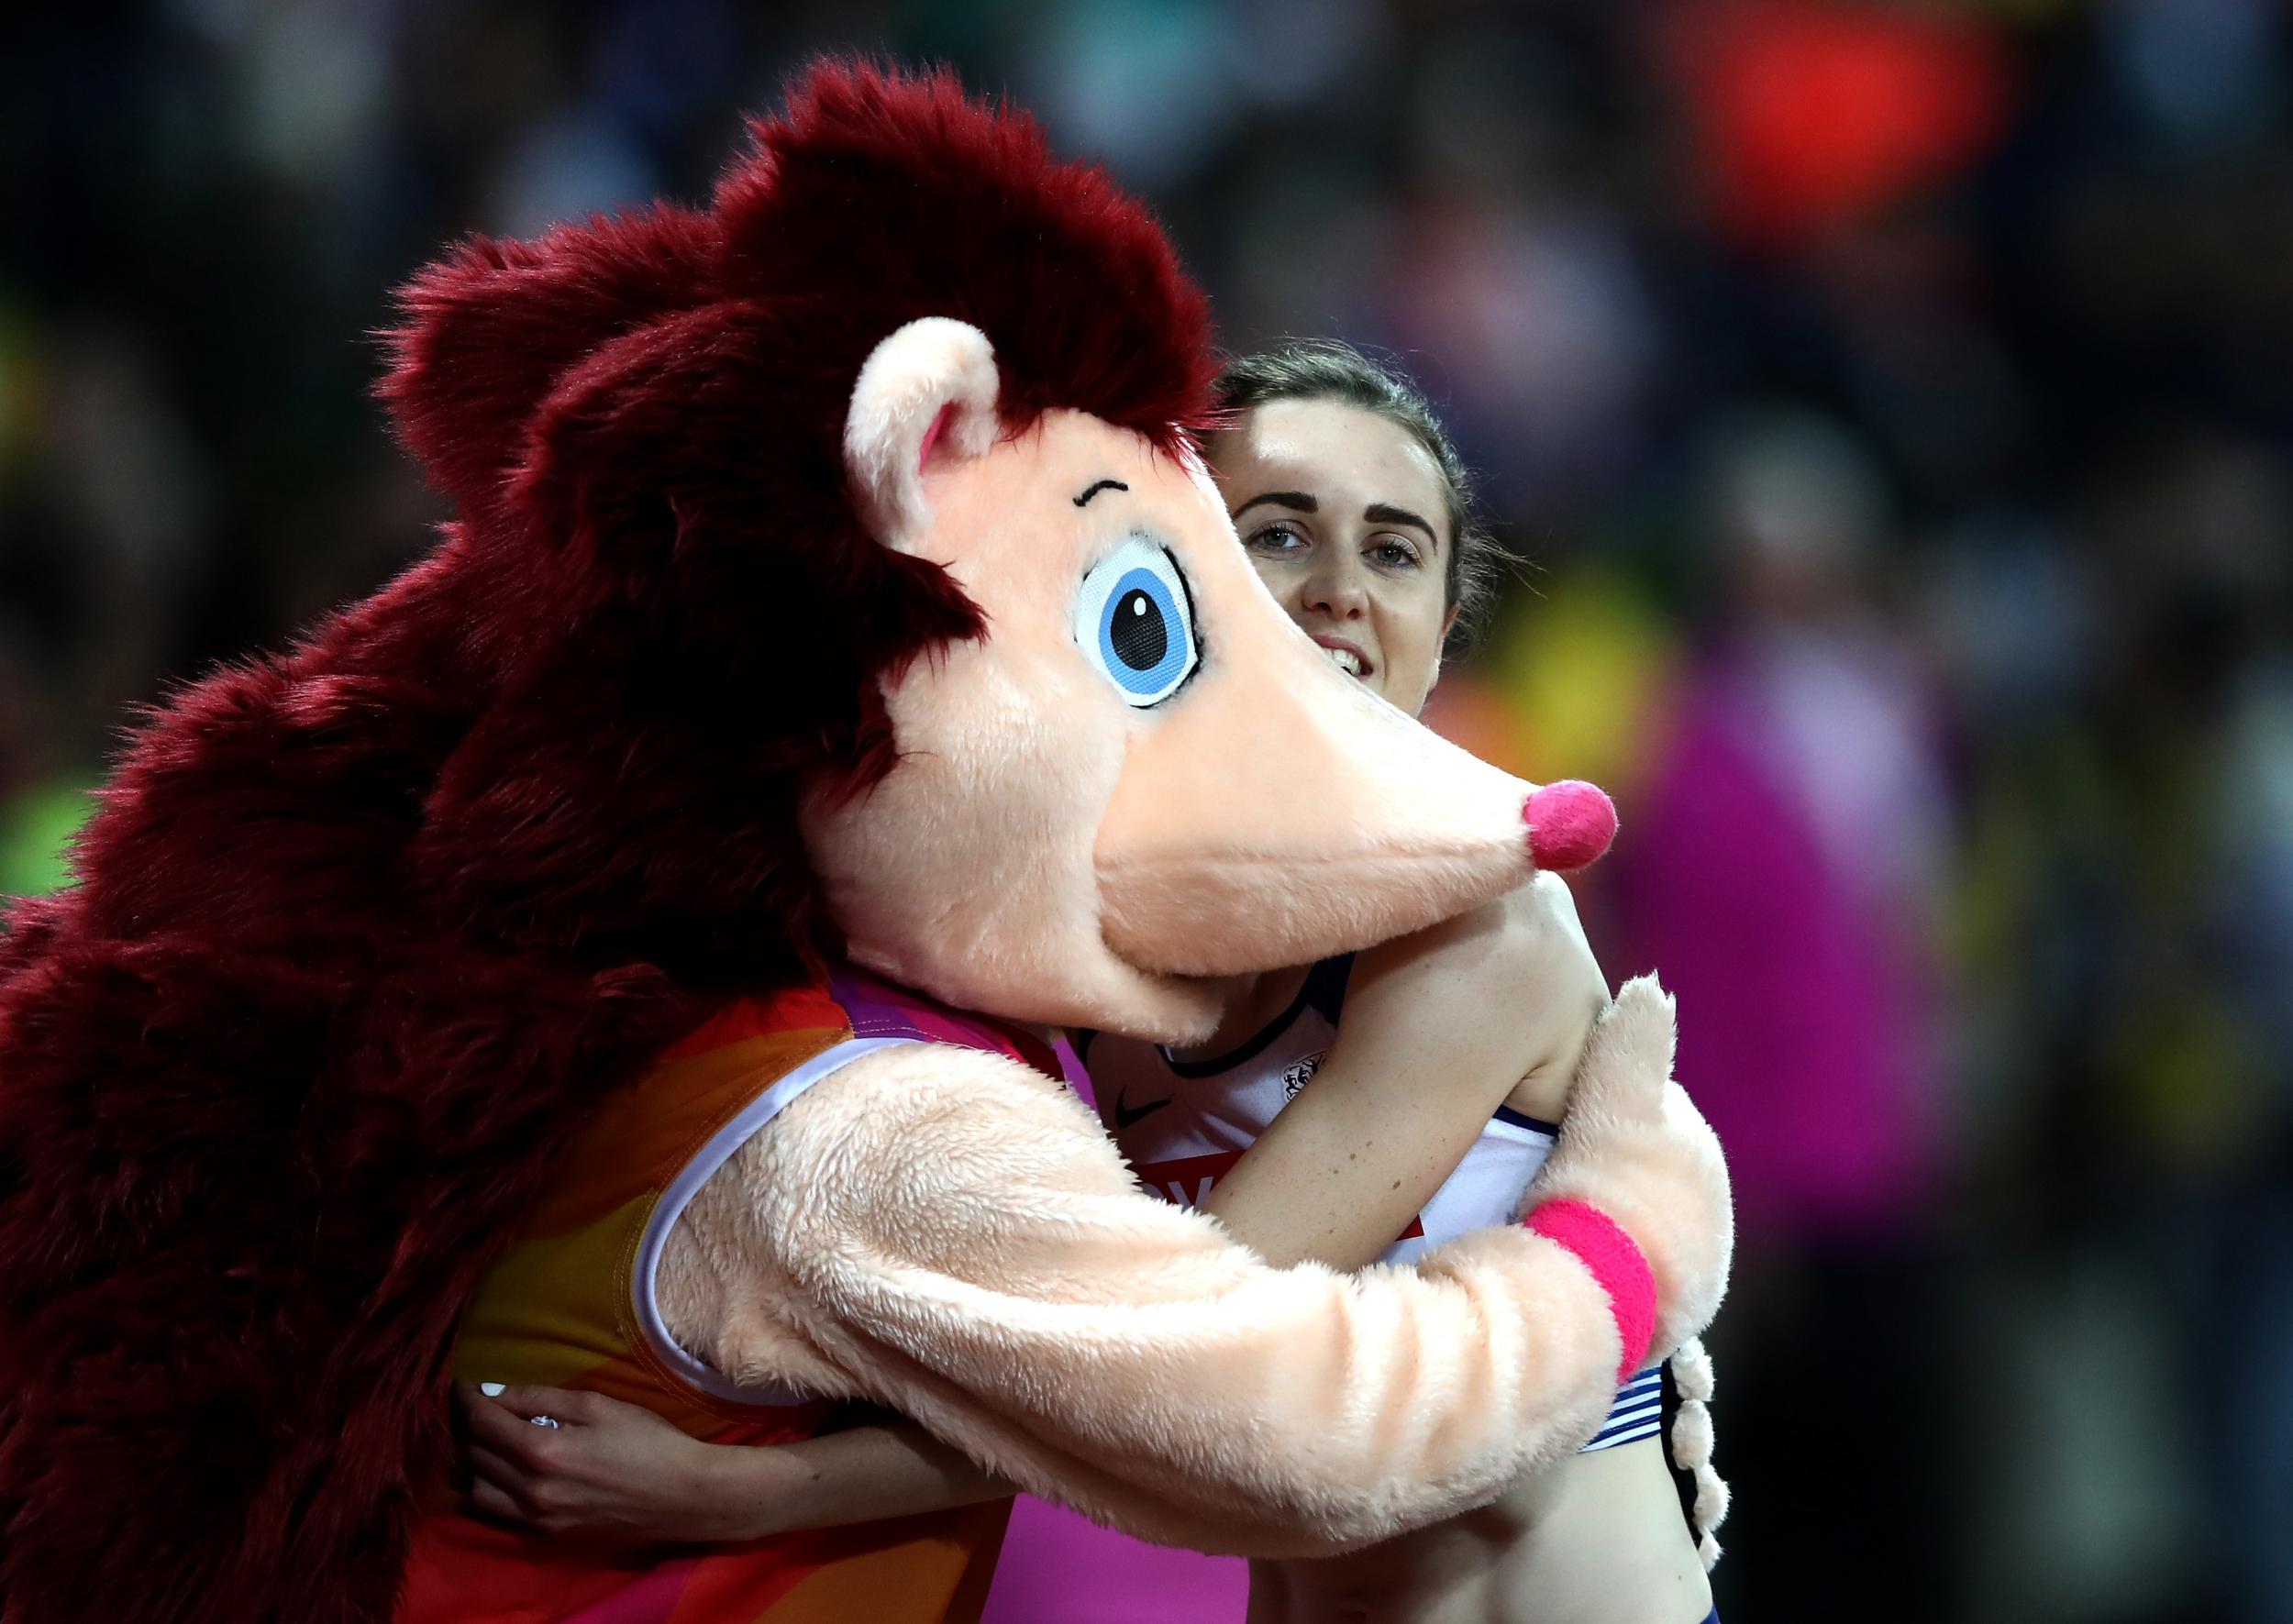 The home hope at least received a consoling hug from the tournament mascot